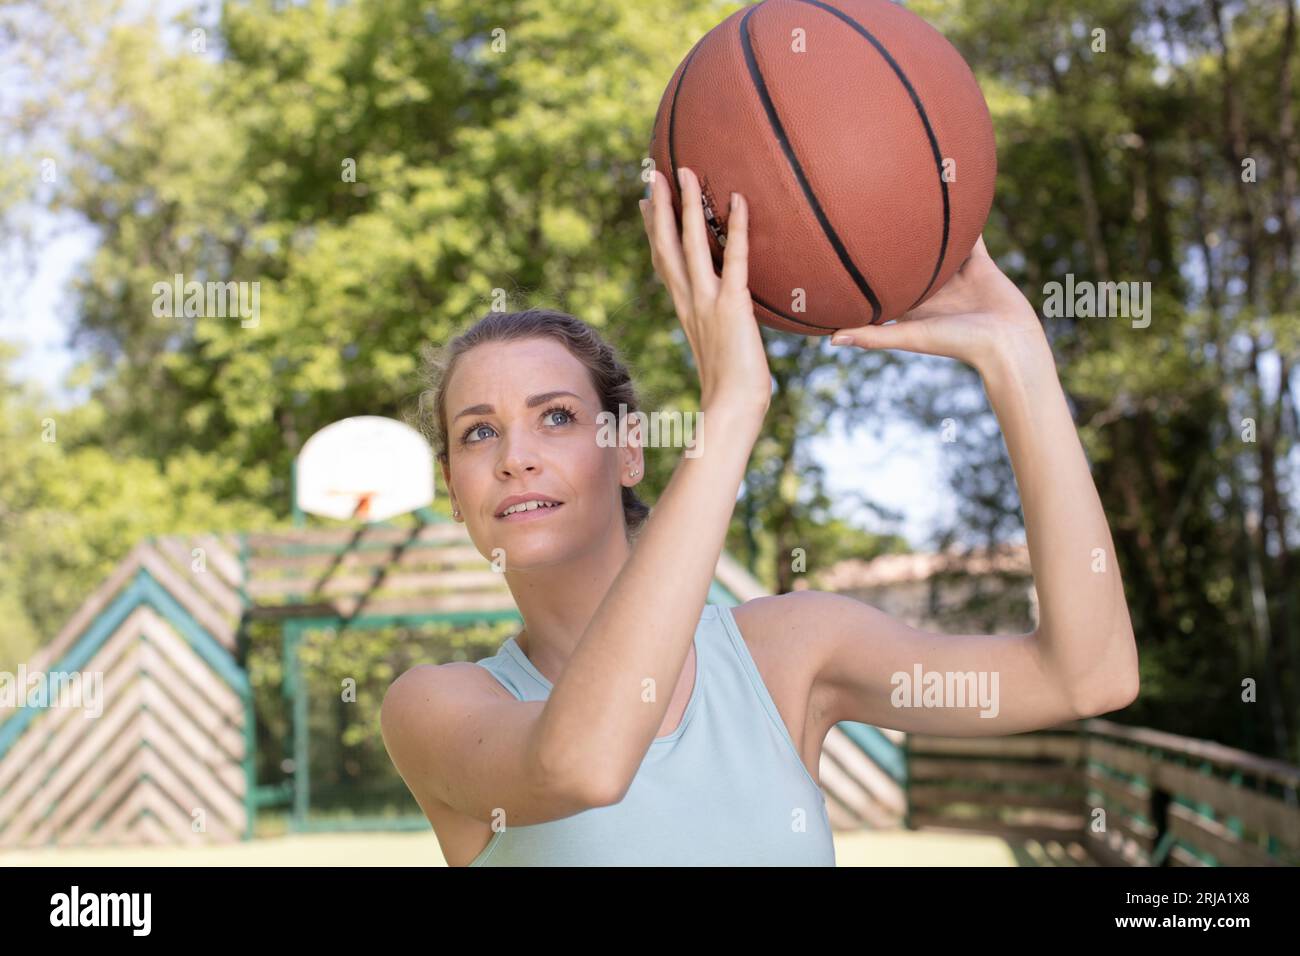 young woman ready to throw basketball into loop Stock Photo